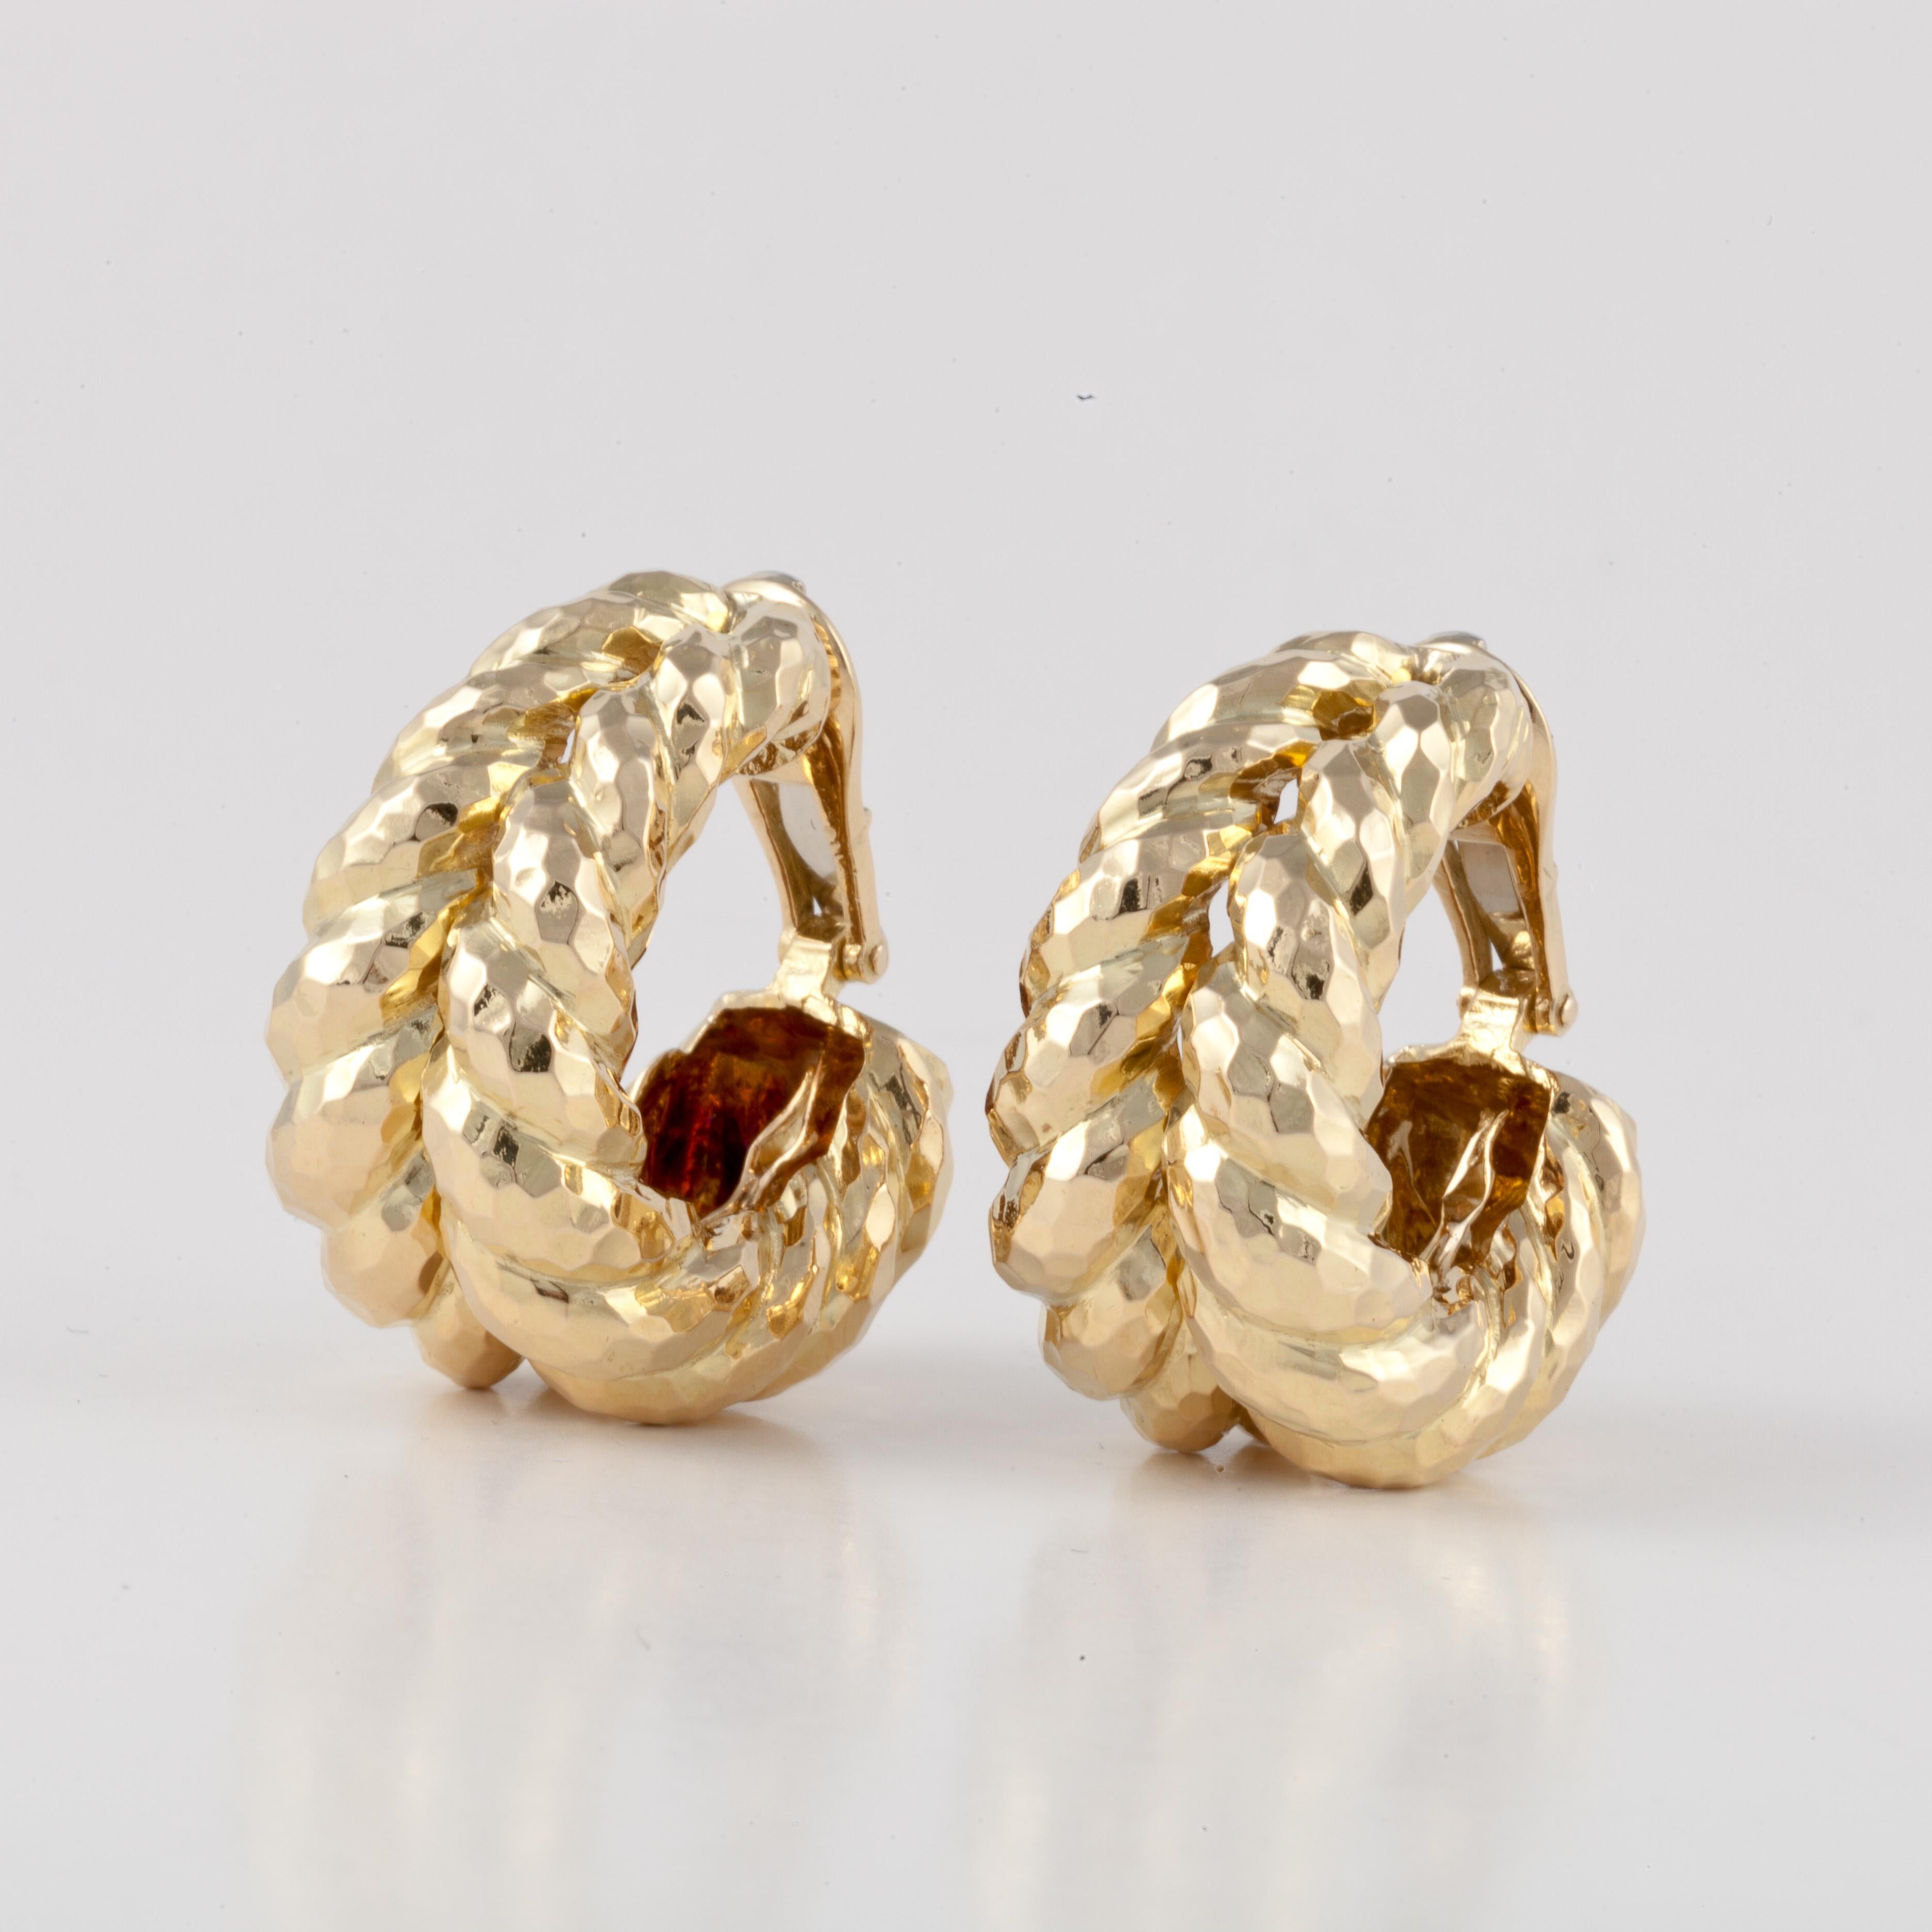 David Webb large semi-hoop earrings in 18K yellow gold with a hammered finish.  They measure 1 1/8 inches long and 5/8 inches at the widest point.  They are clip style earrings.